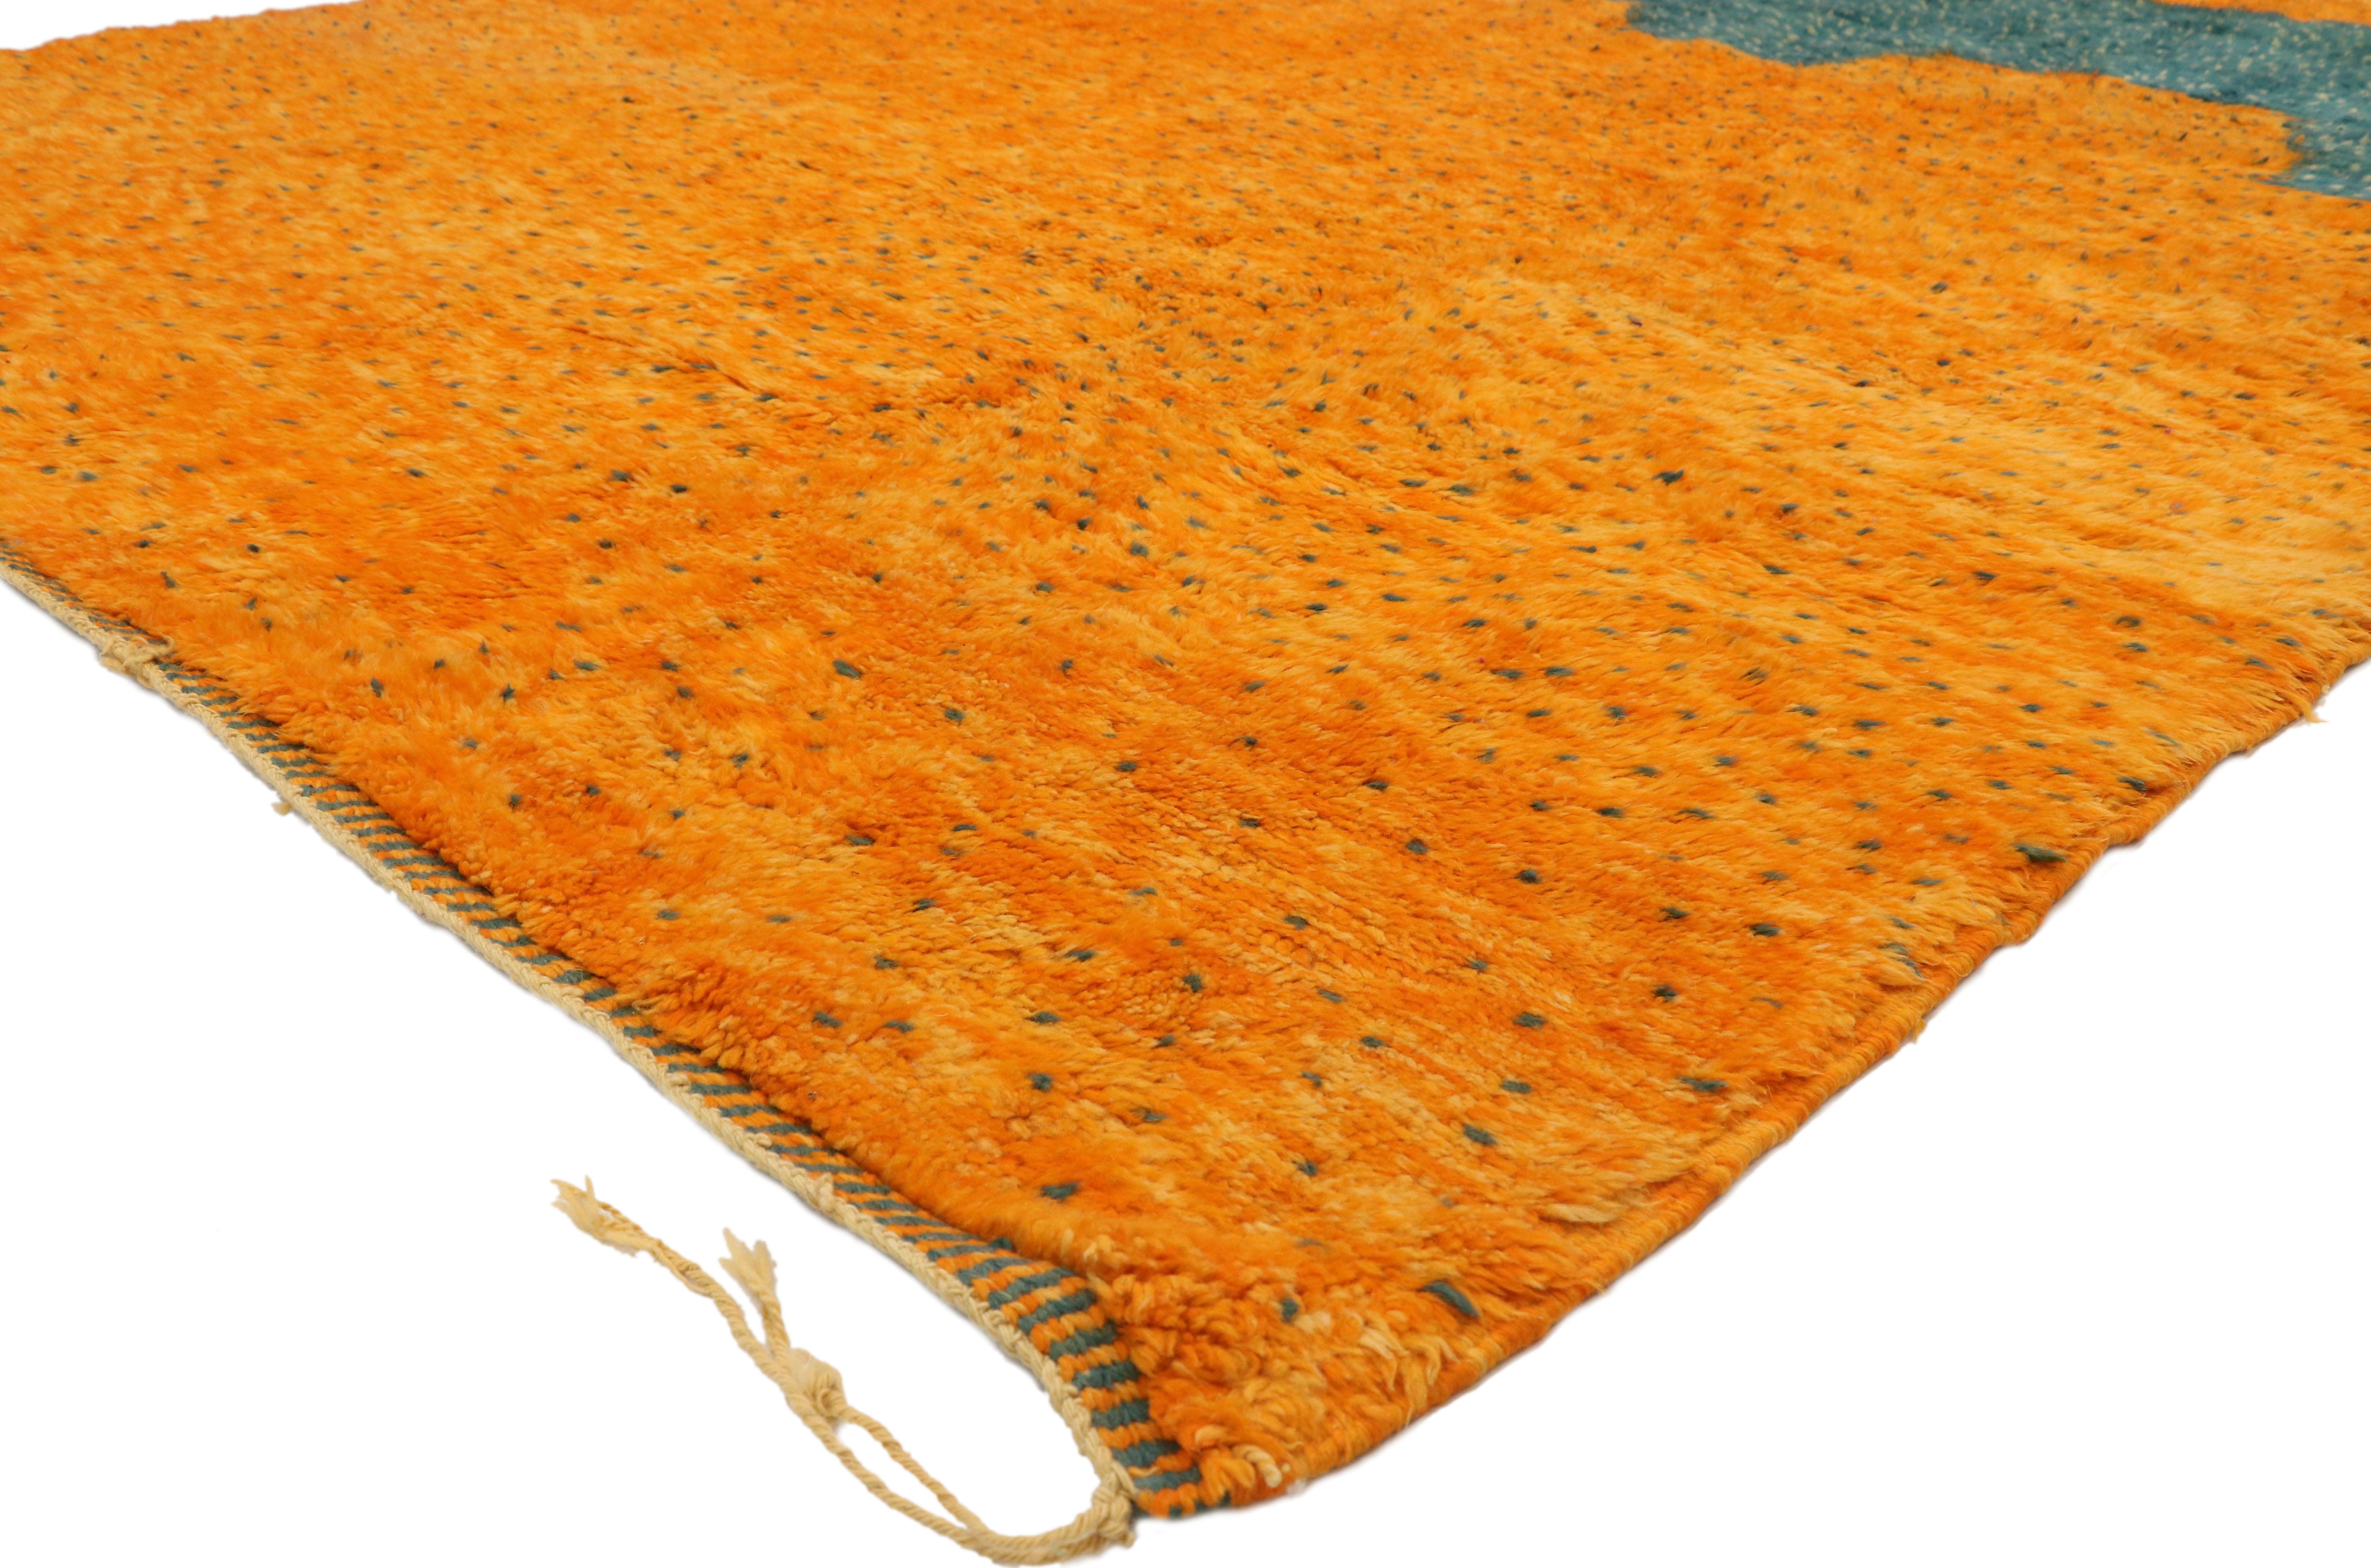 20995, new contemporary Berber Moroccan area rug with Abstract Expressionist style 08'09 x 10'07. Featuring a luminous orange glow, rich waves of abrash, and luxury underfoot, this hand knotted wool contemporary Moroccan rug draws inspiration from